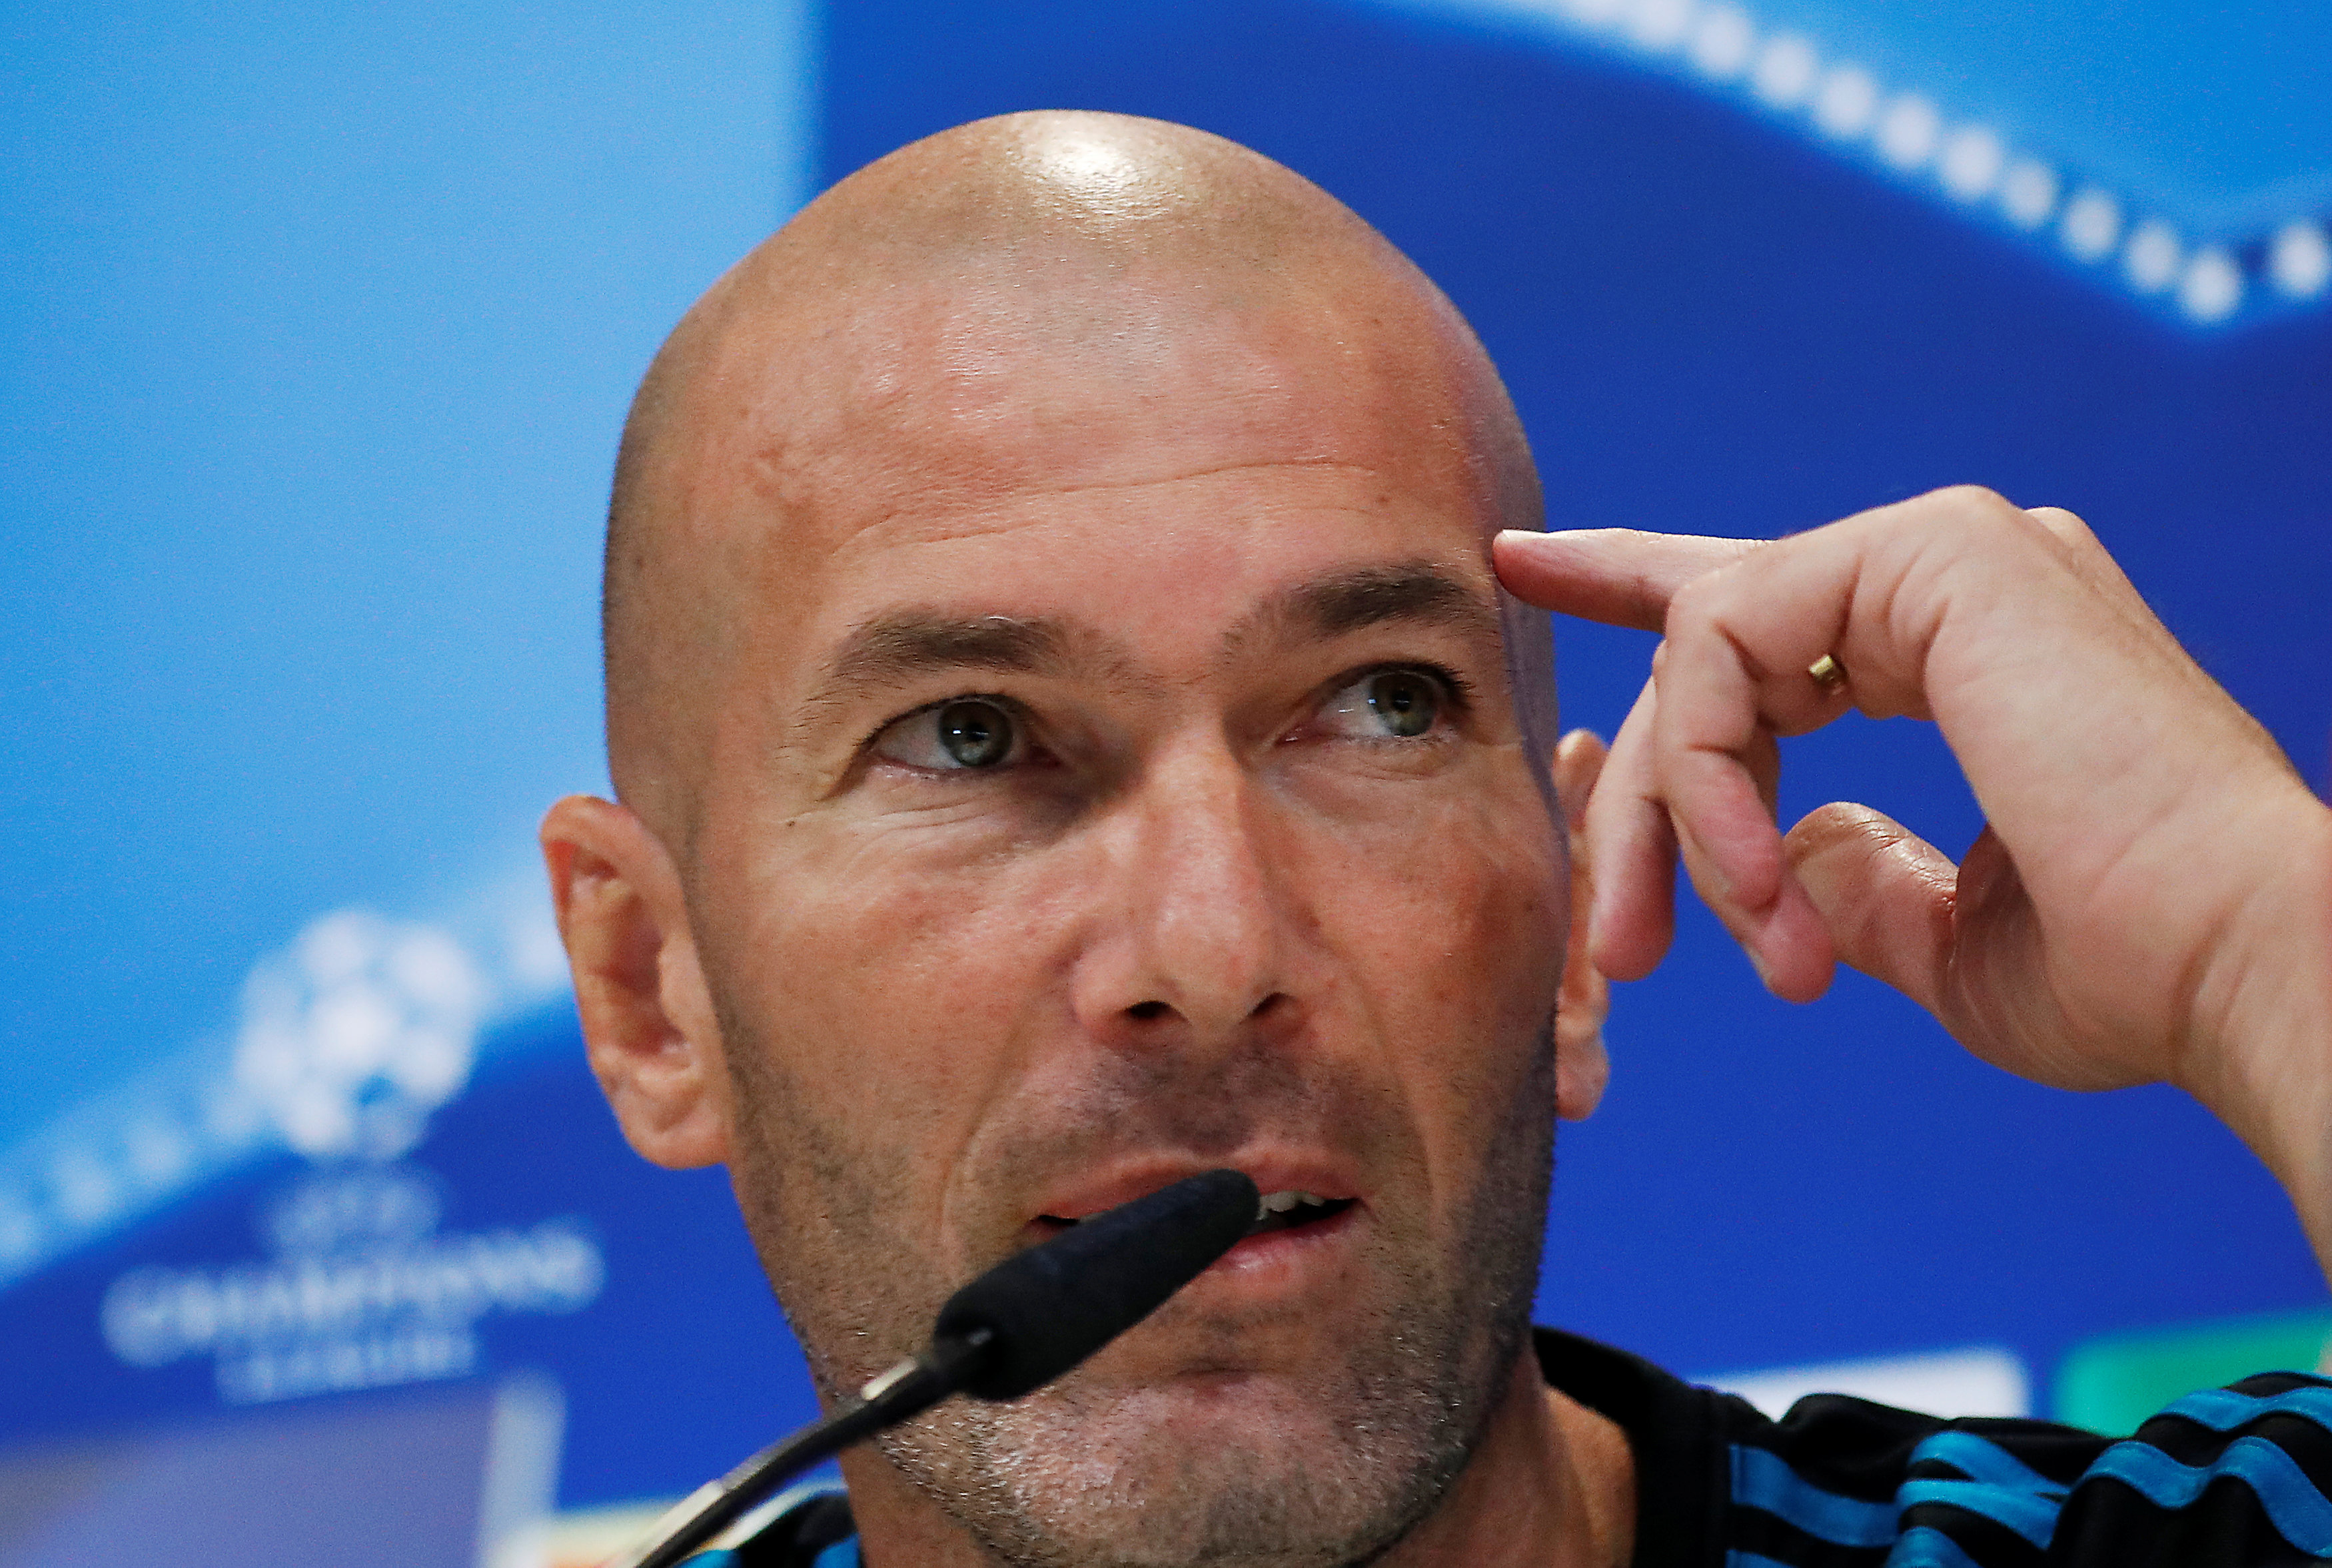 Football: Zidane wants more from Bale as Madrid face soaring Sociedad